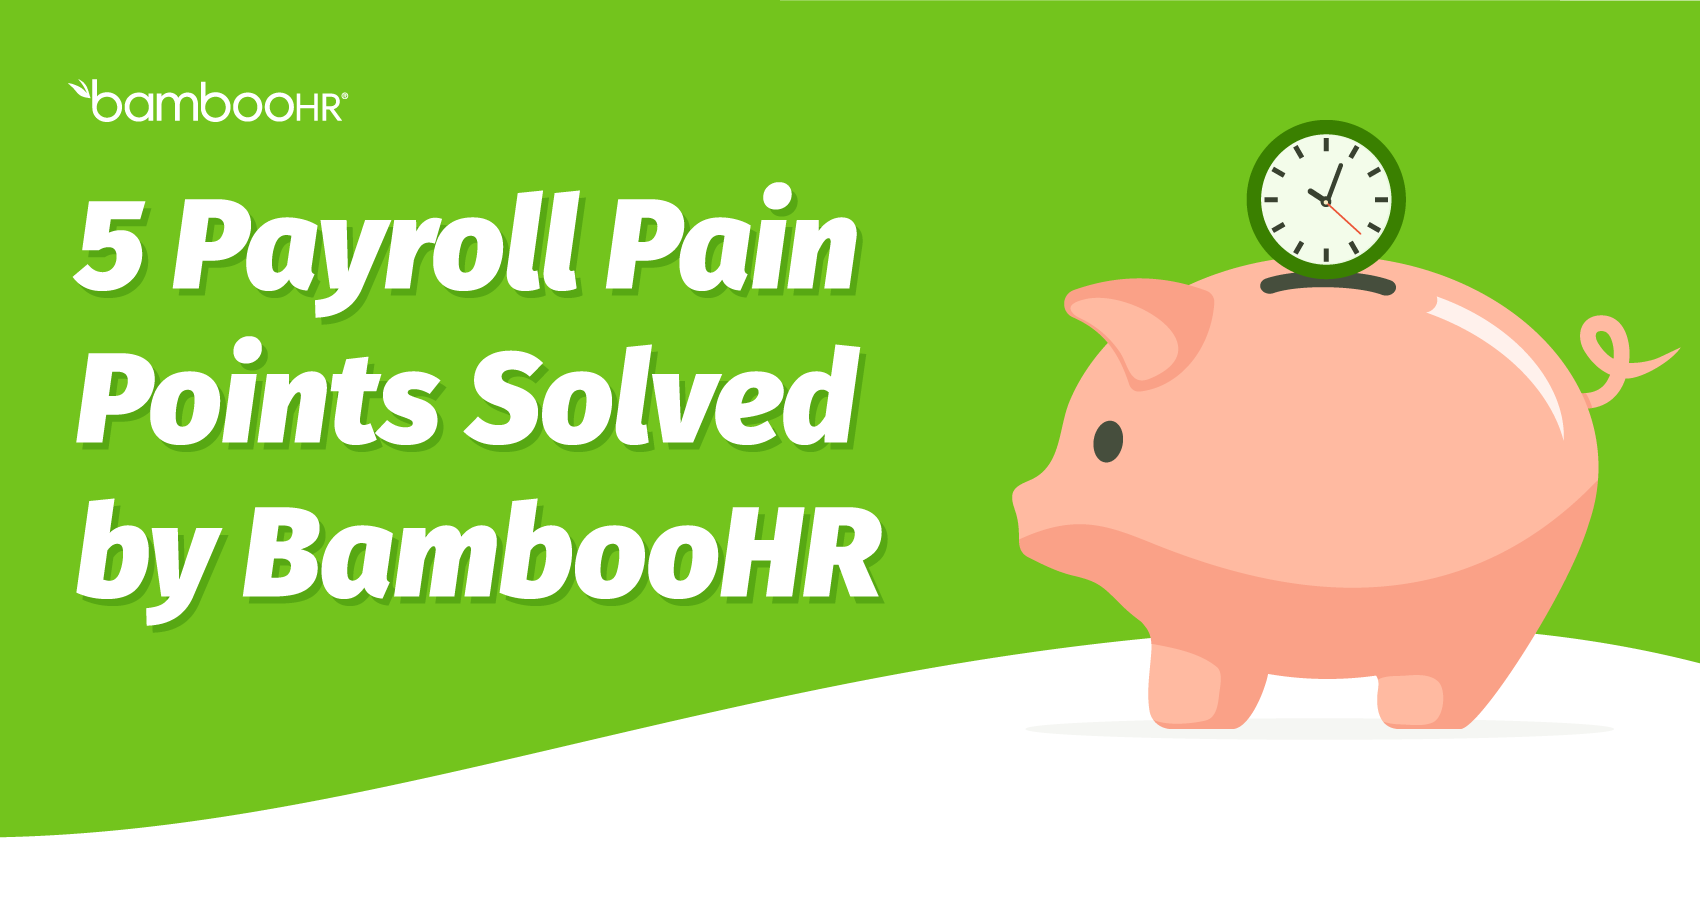 5 Payroll Pain Points Solved by BambooHR